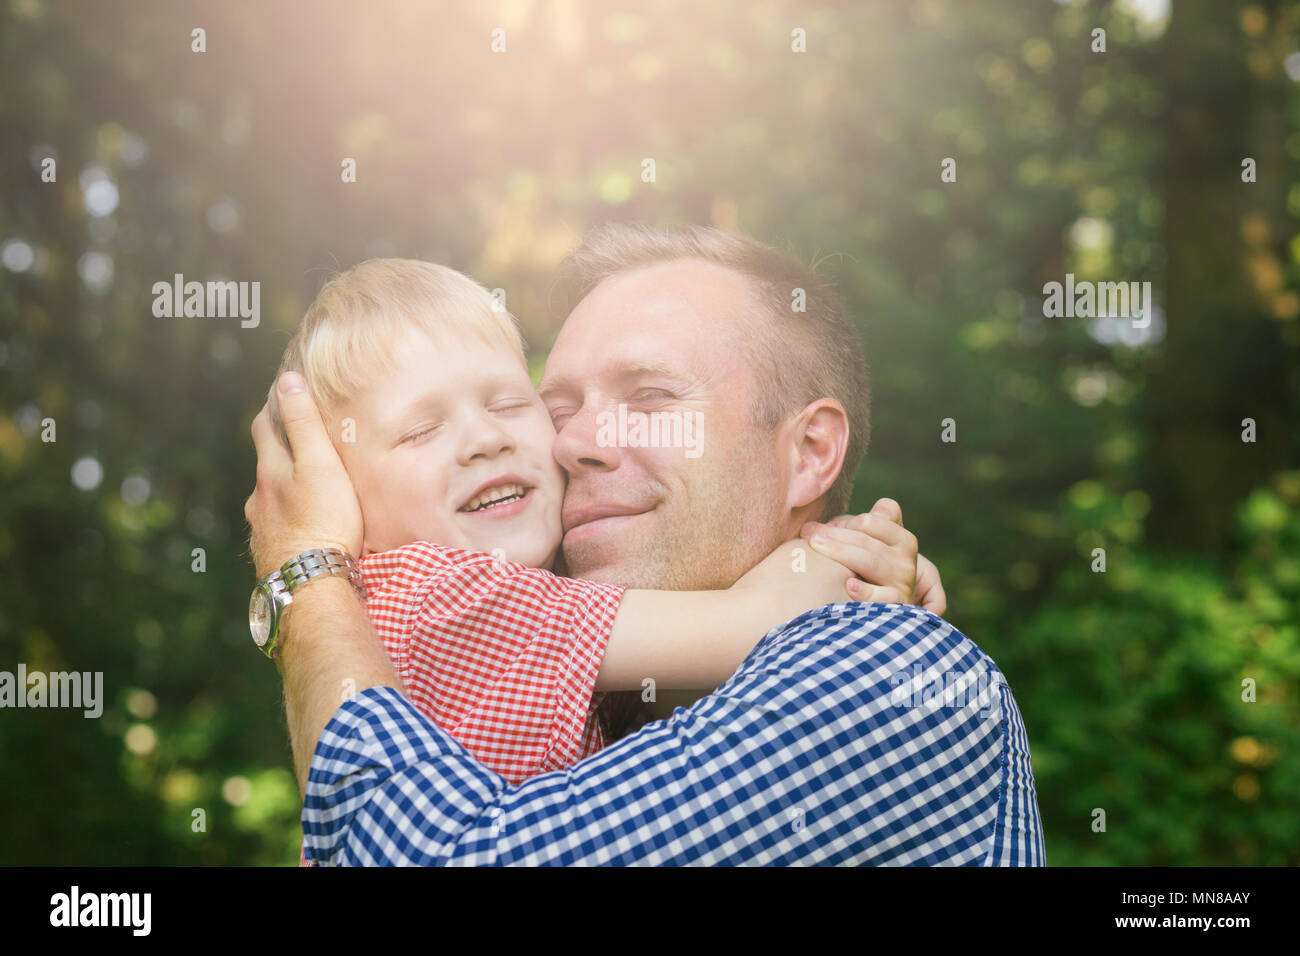 Father and son hugging and smiling in the garden. Masculinity concept. Stock Photo